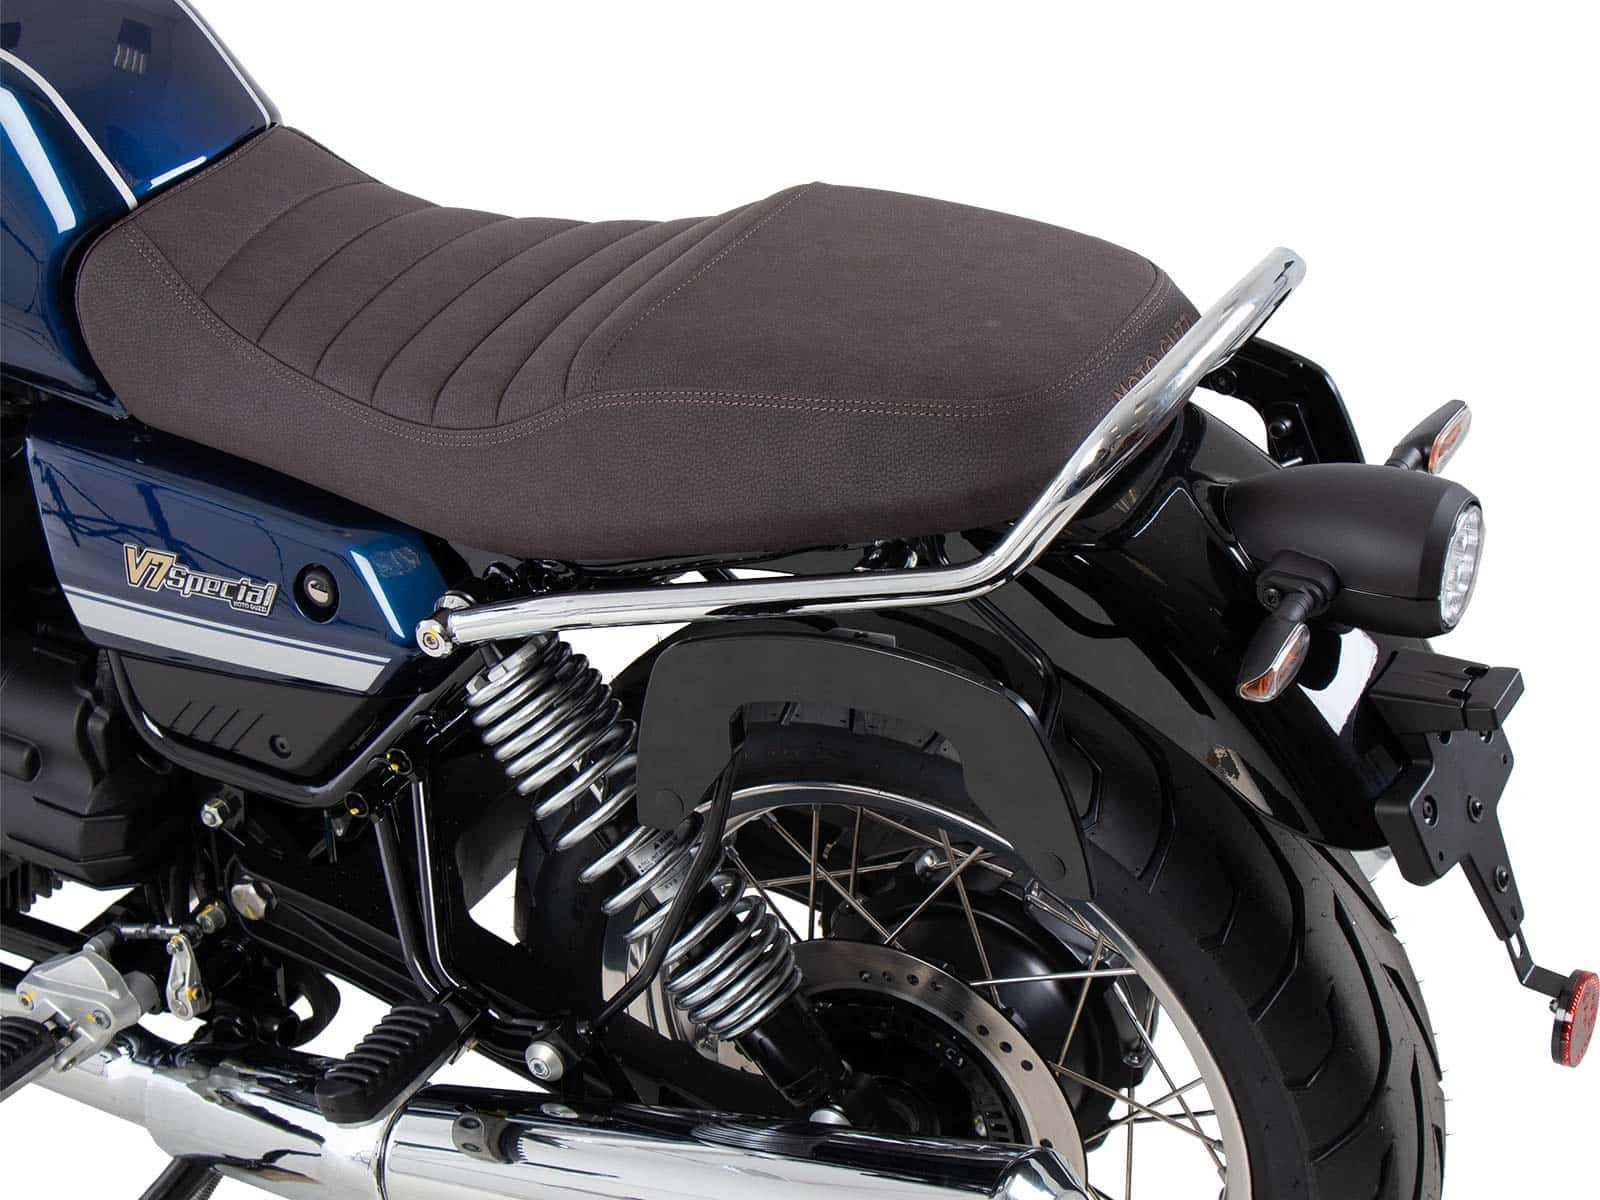 C-Bow sidecarrier for Moto Guzzi V7 Stone / Special